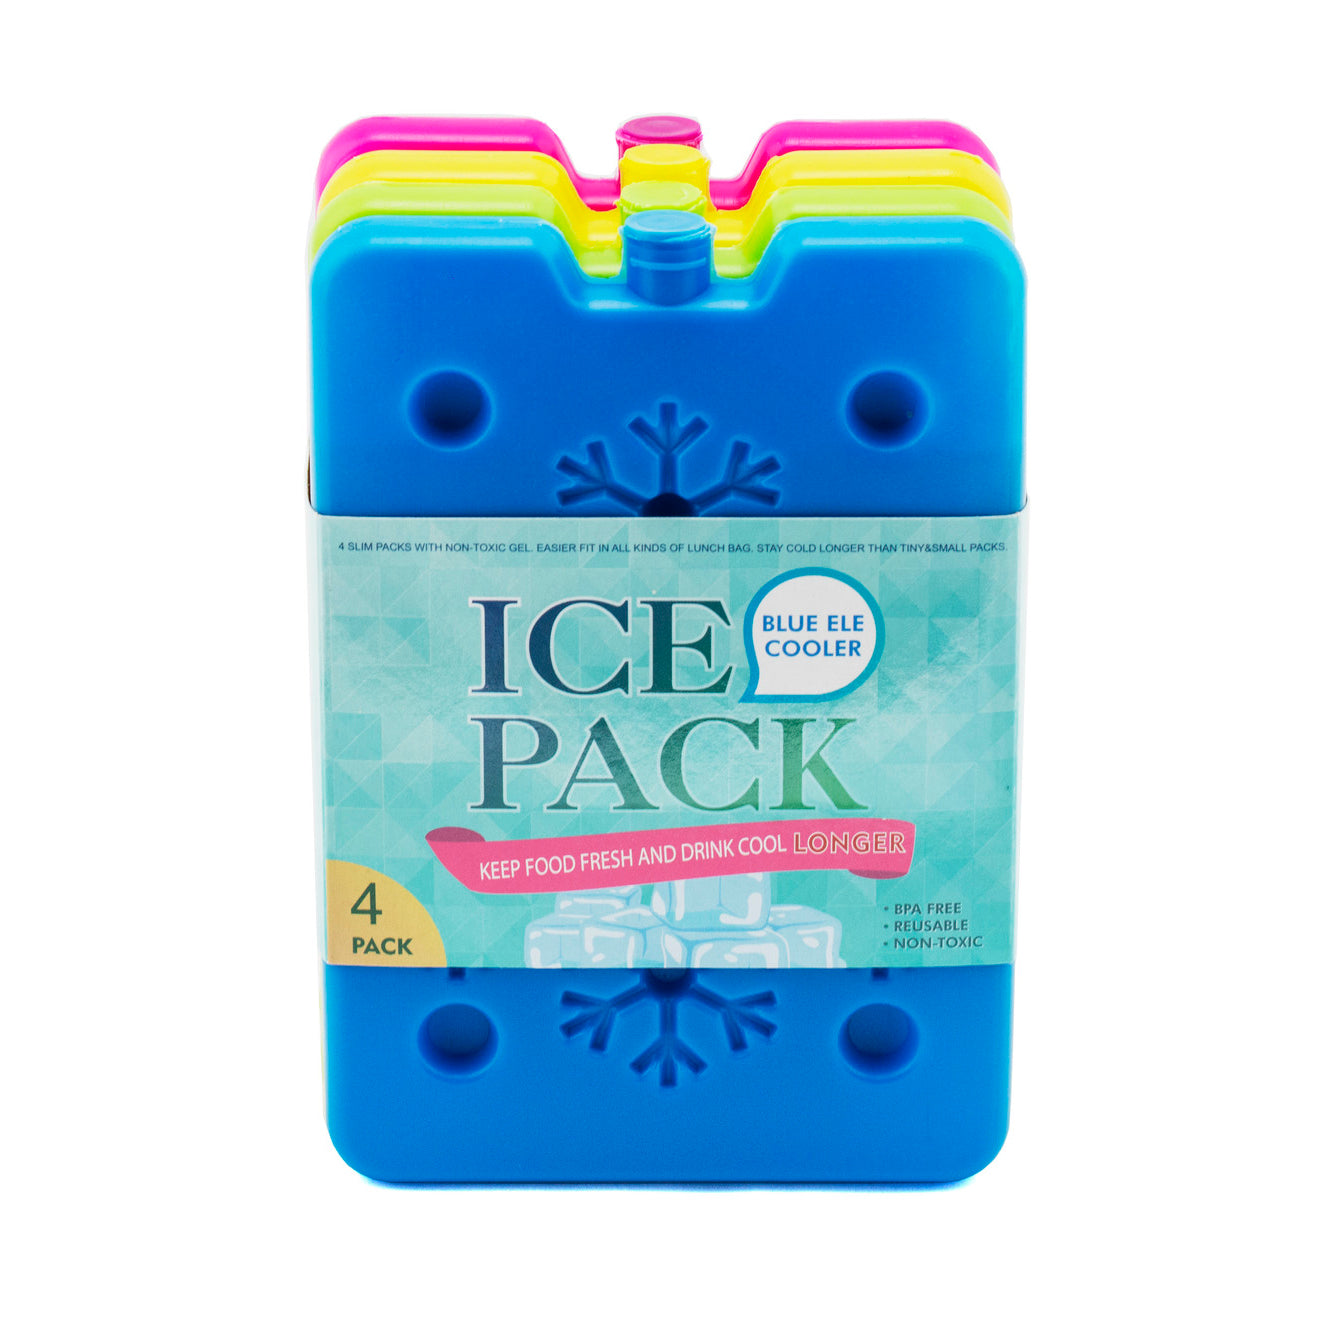 Yumbox Ice Packs - set of 4 Multi - Cool Pack, Slim Long-Lasting Ice Packs  - Great for Coolers or Lunch Box